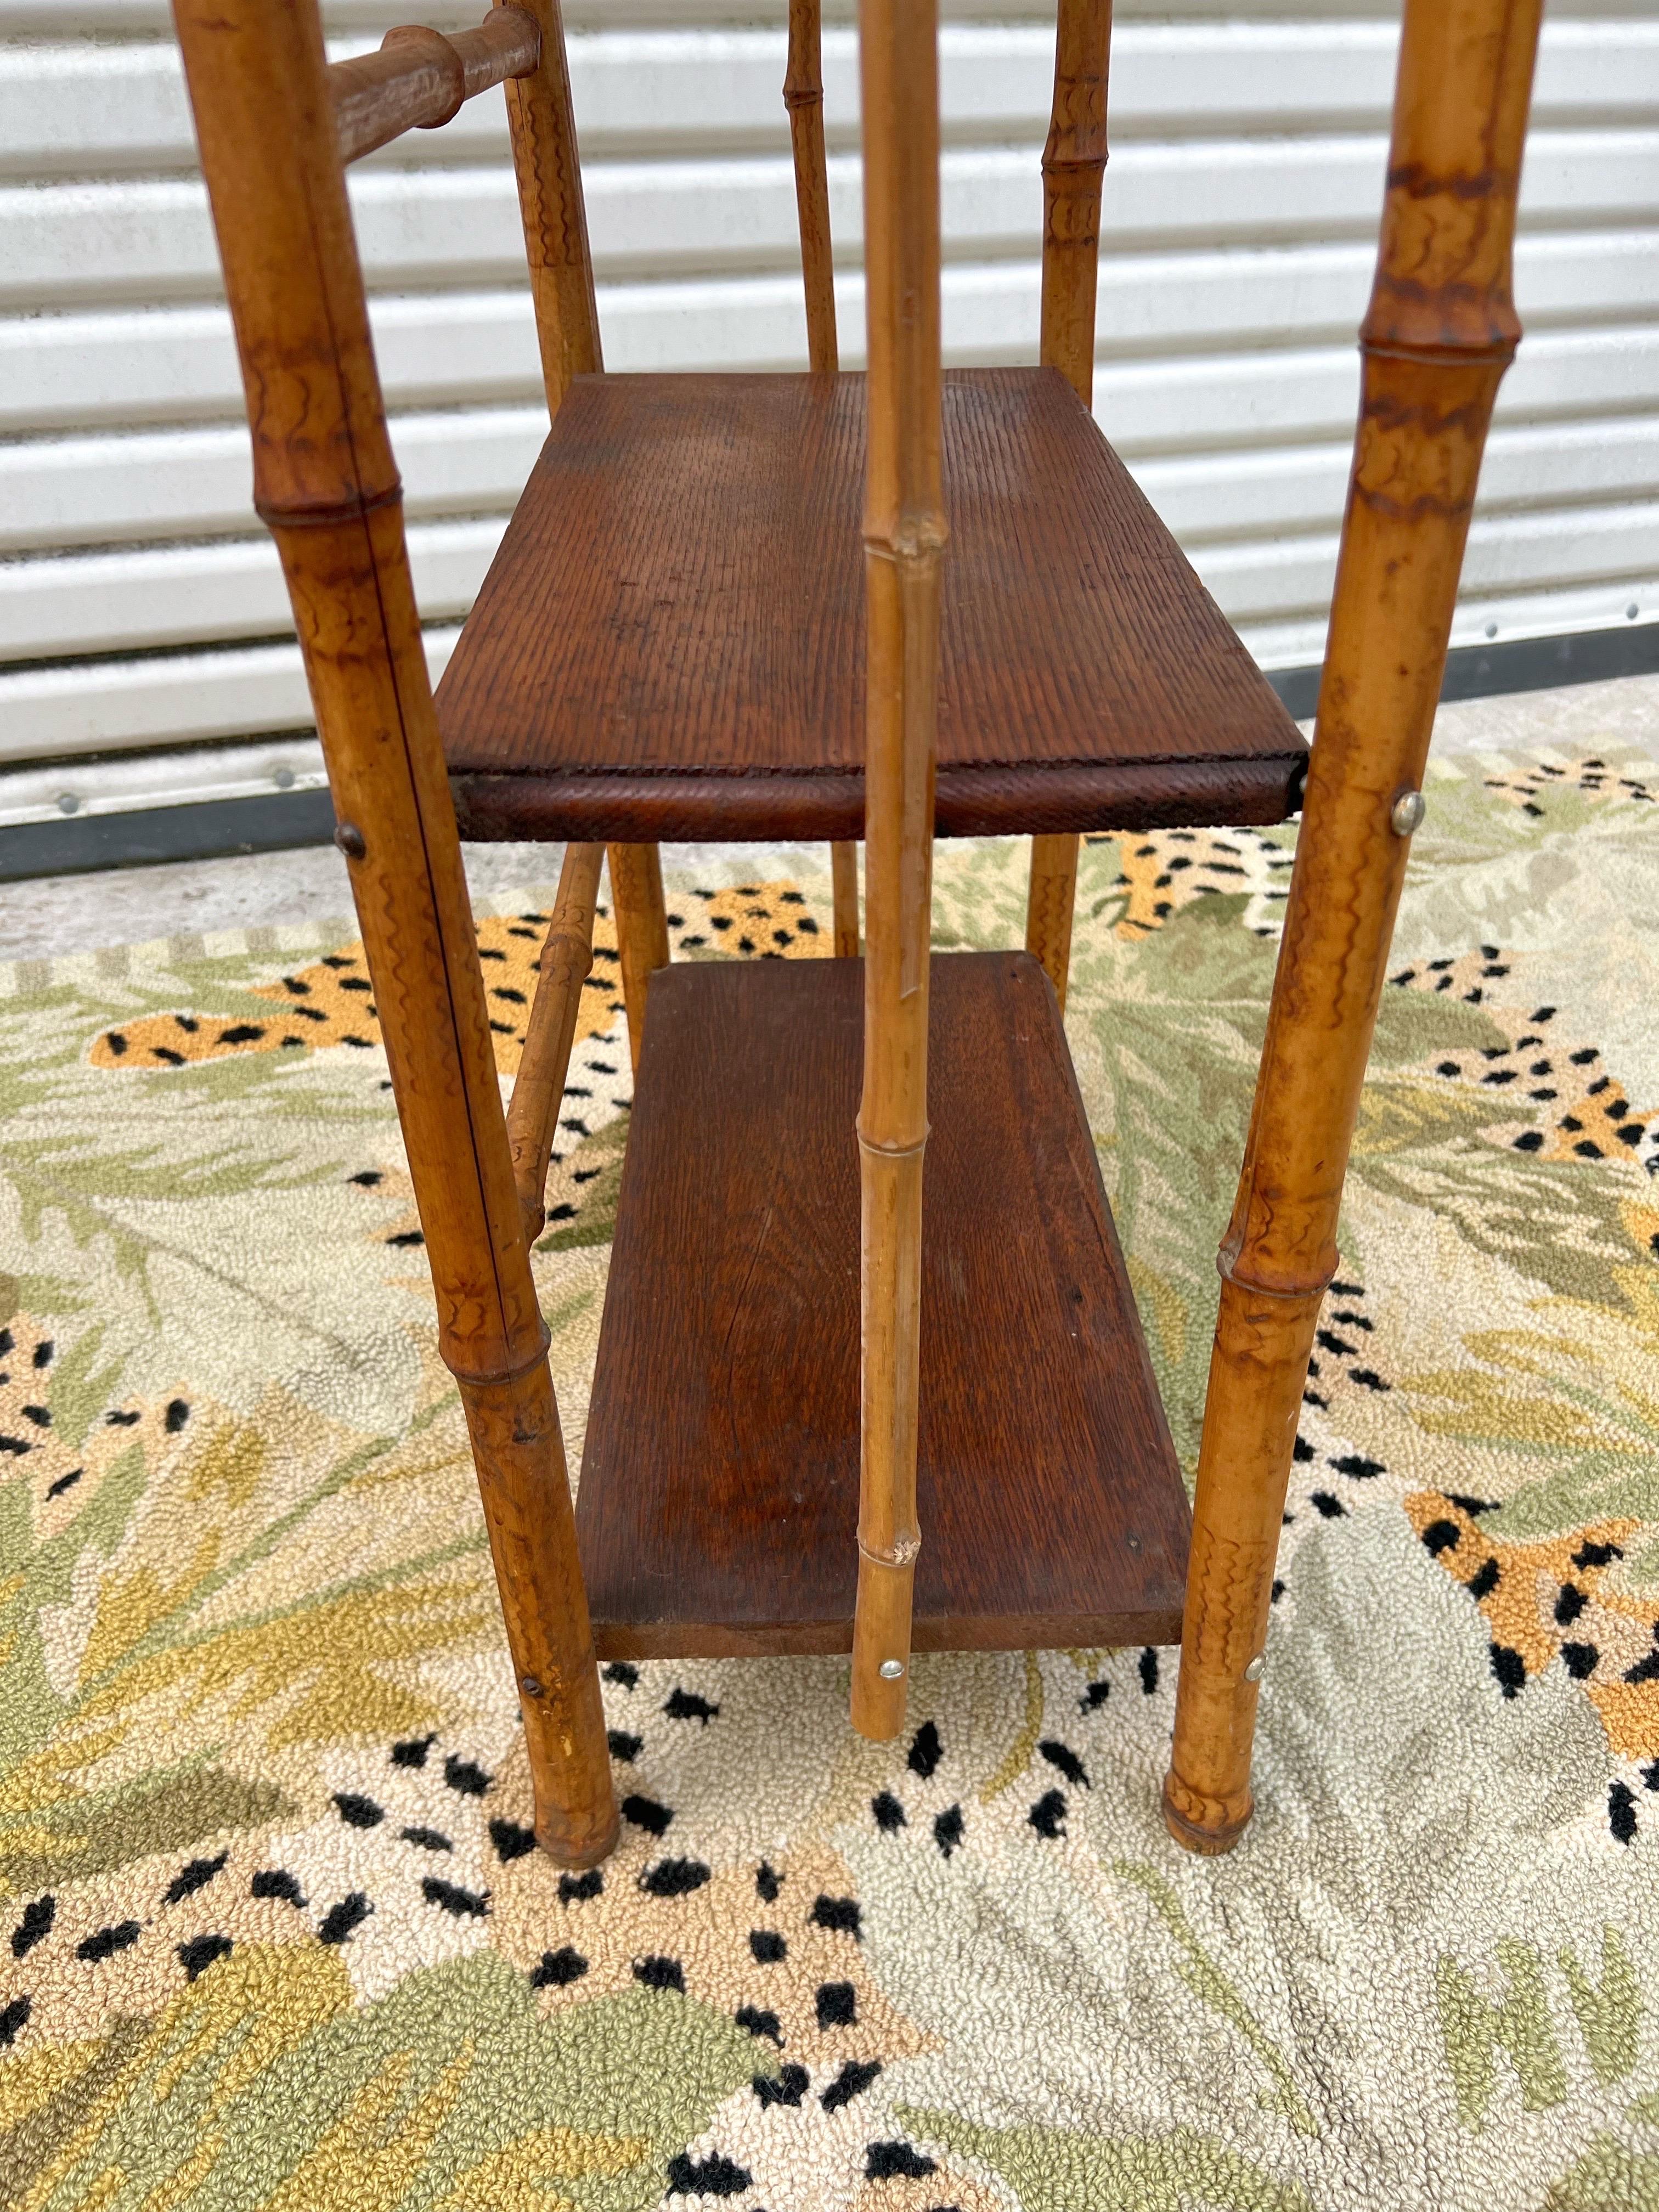 19th Century Antique Four Tier Bamboo Rack In Good Condition For Sale In Charleston, SC